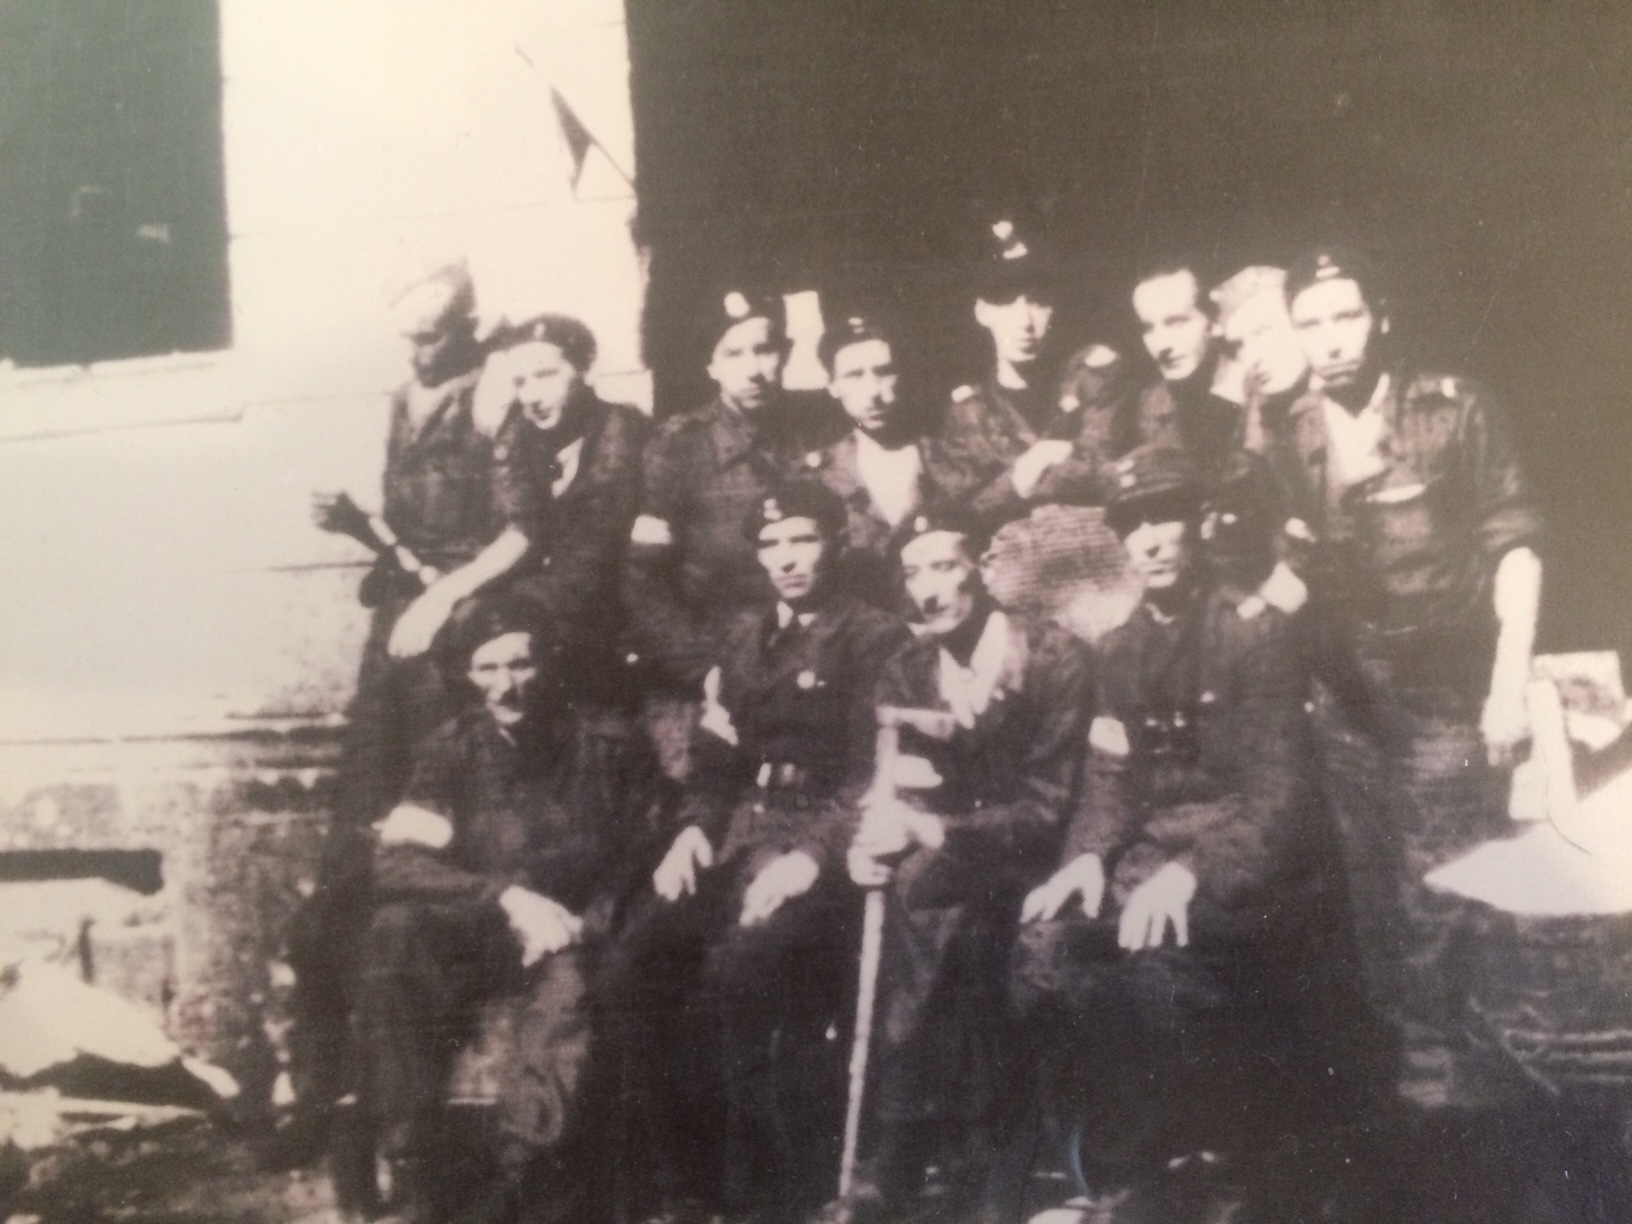 Piekałkiewicz, back row fourth from left, stands with his squad "Krzywda" during the Warsaw Uprising in August 1944. 